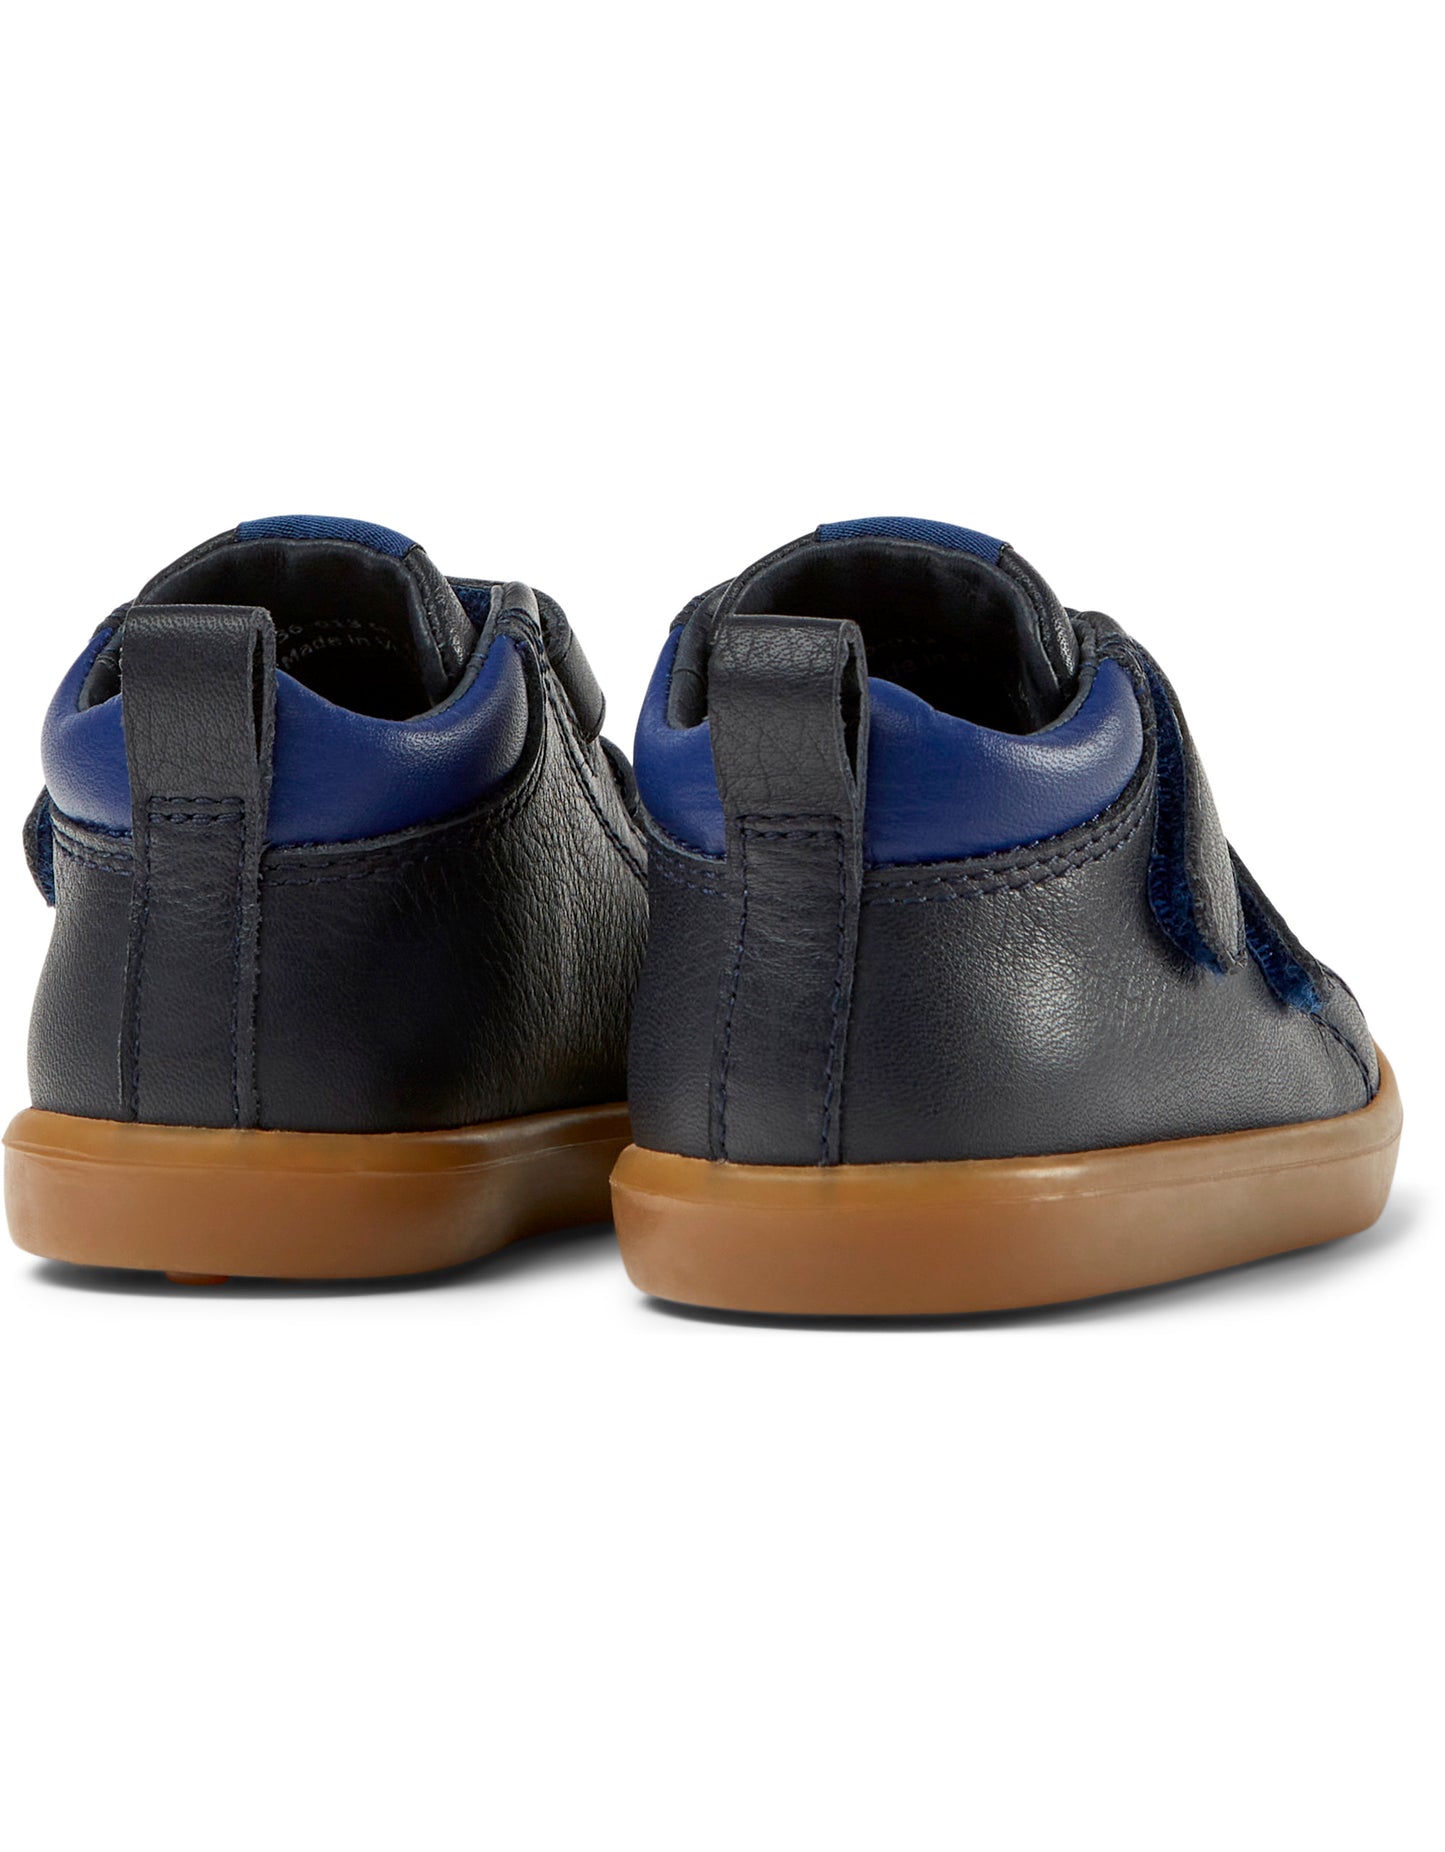 A pair of boys casual ankle boots by Camper, style K900236-013 in navy and blue leather with double velcro fastening. Angled view.